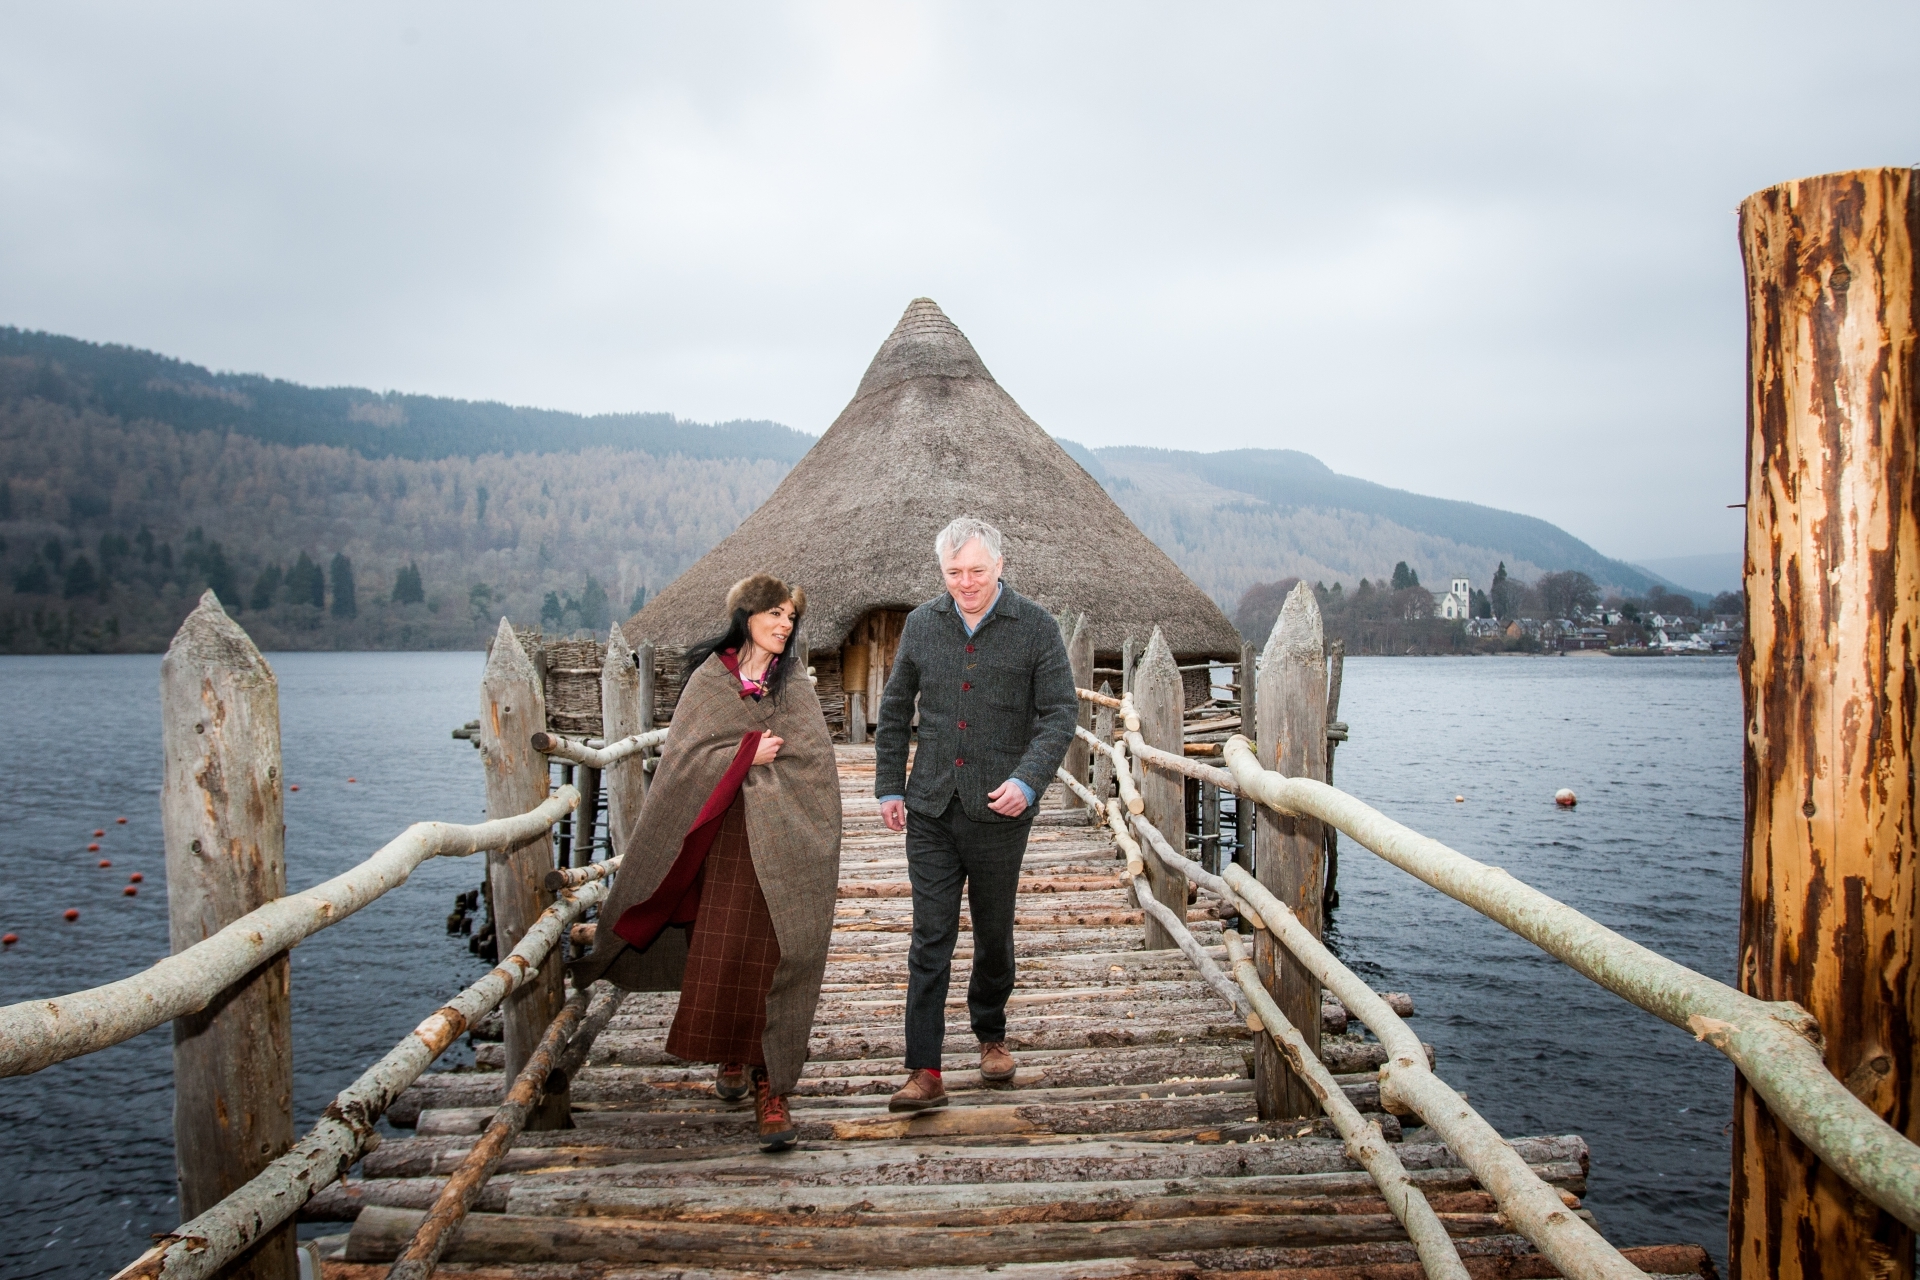 Gayle Ritchie meets Mike Benson, the new director of the Scottish Crannog Centre ahead of Celtic Spring.